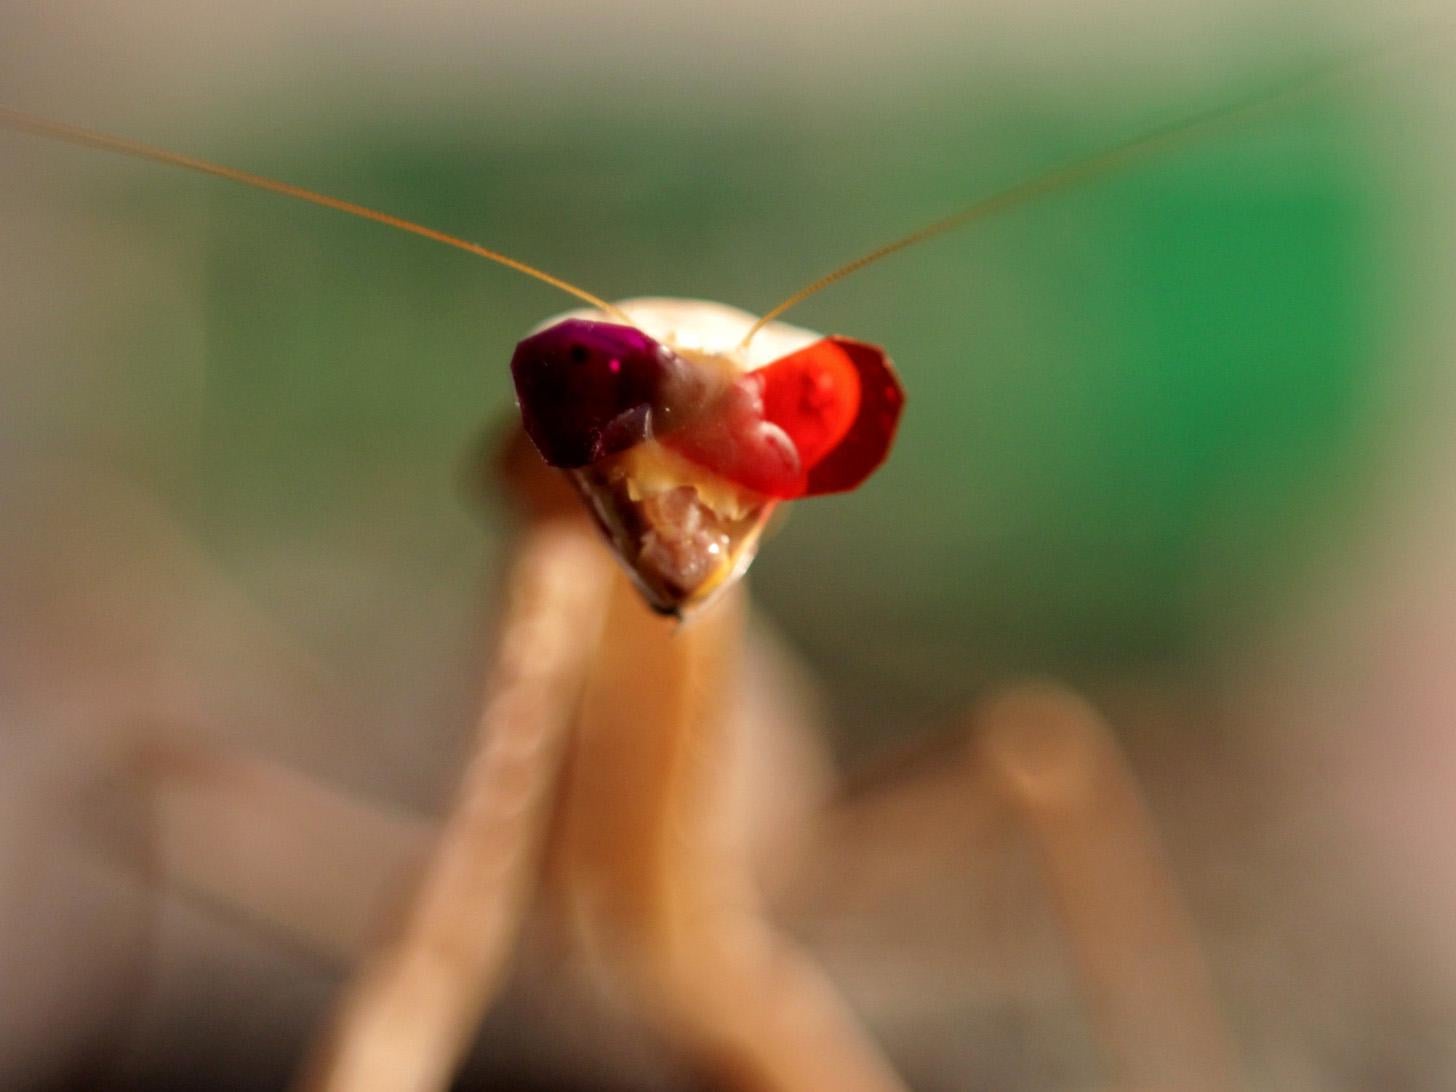 A praying mantis fitted with miniature 3D glasses in a research facility at Newcastle University